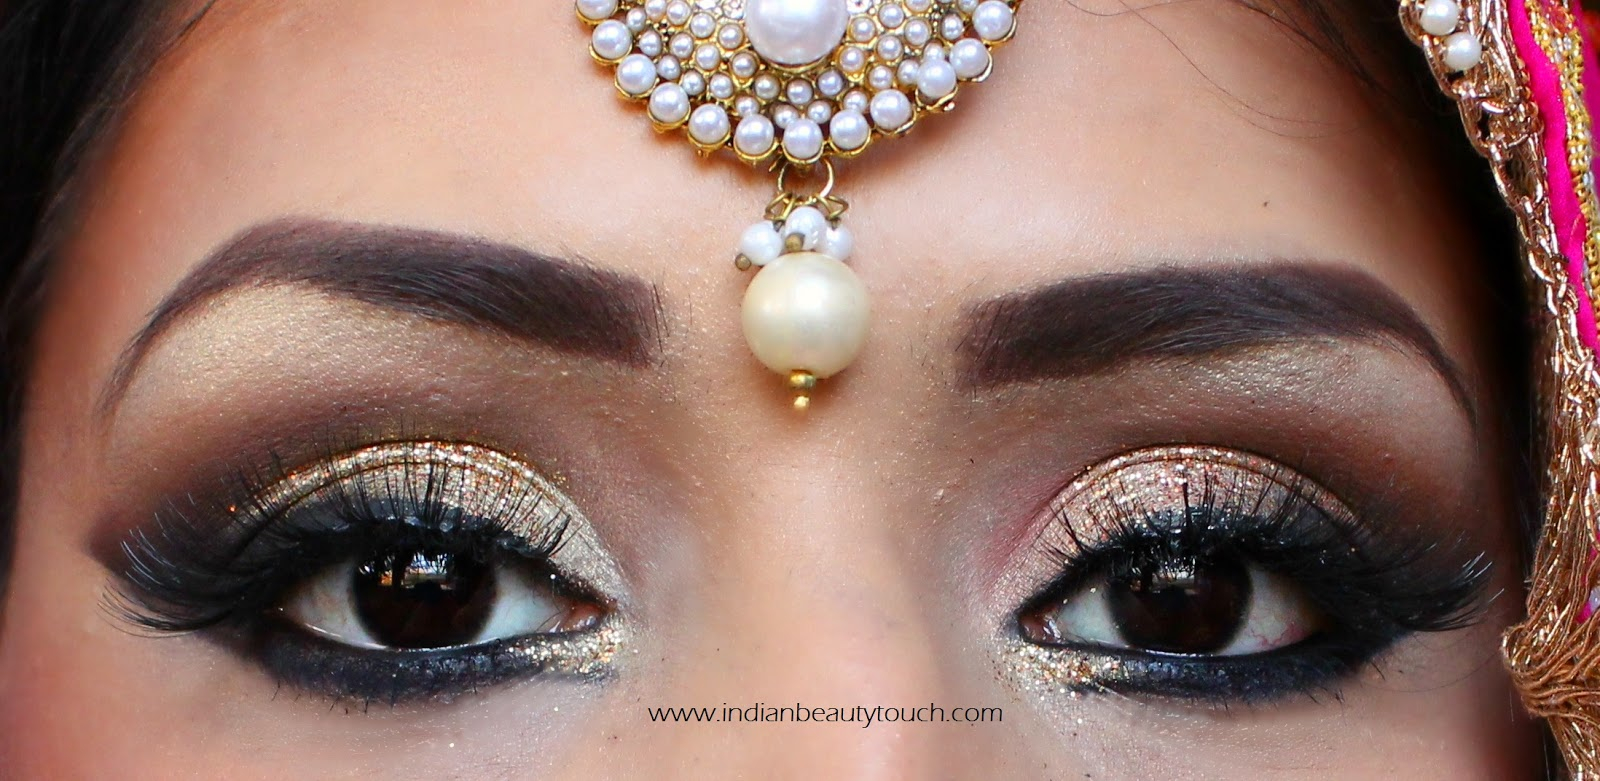 How To Do Wedding Eye Makeup How To Do Indian Bridal Eye Makeup Indian Beauty Touch